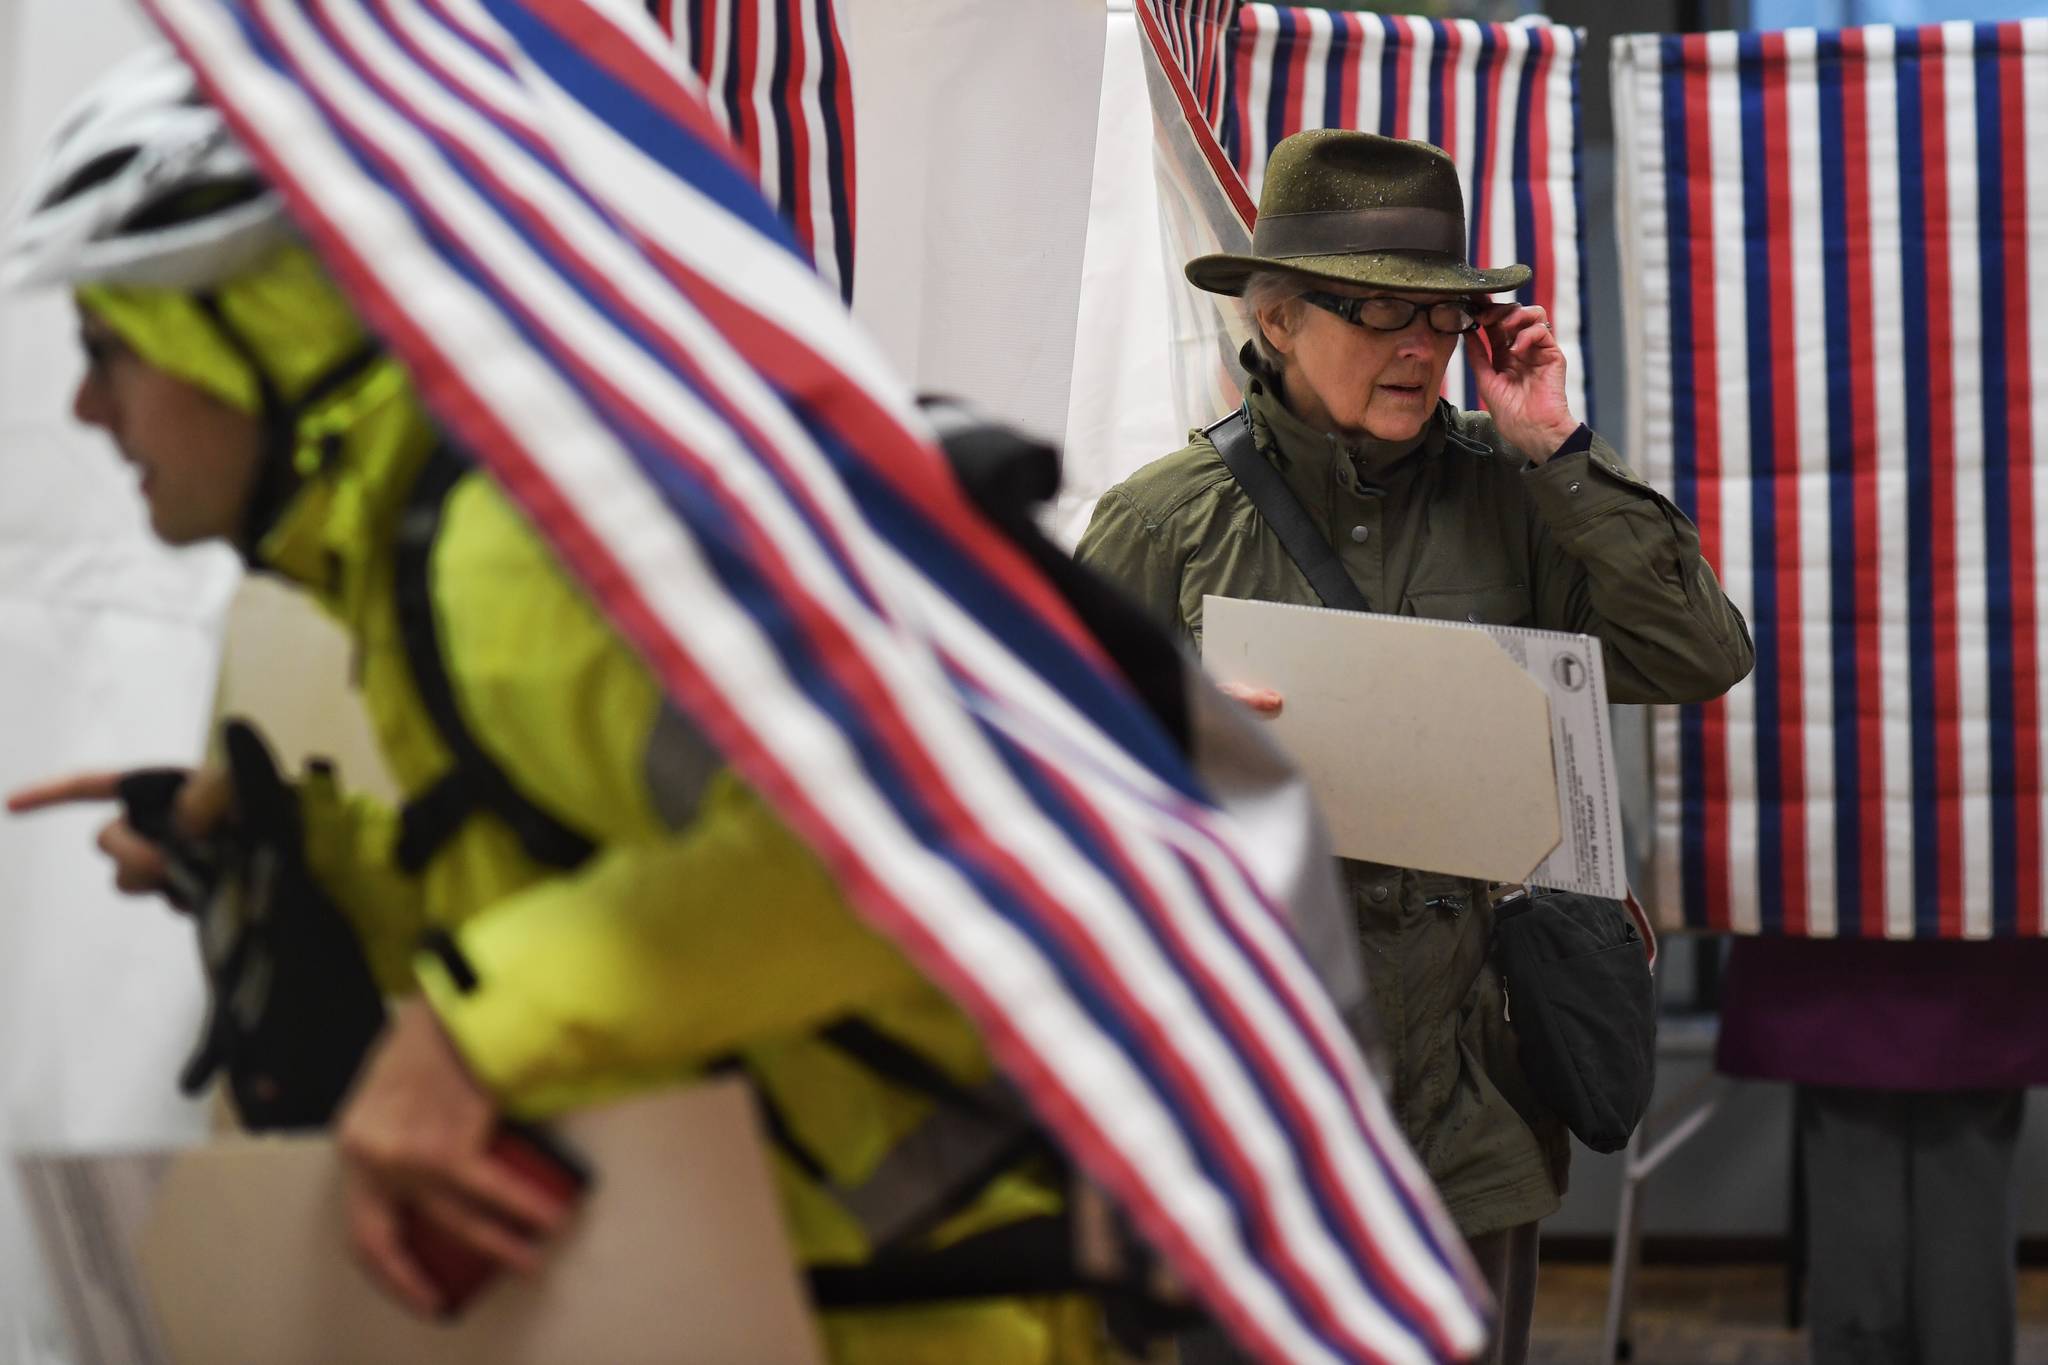 Ben Williams, left, heads into the voting booth as Suzanne Williams leaves after voting at the Douglas Public Library on Tuesday, Oct. 1, 2019. (Michael Penn | Juneau Empire)